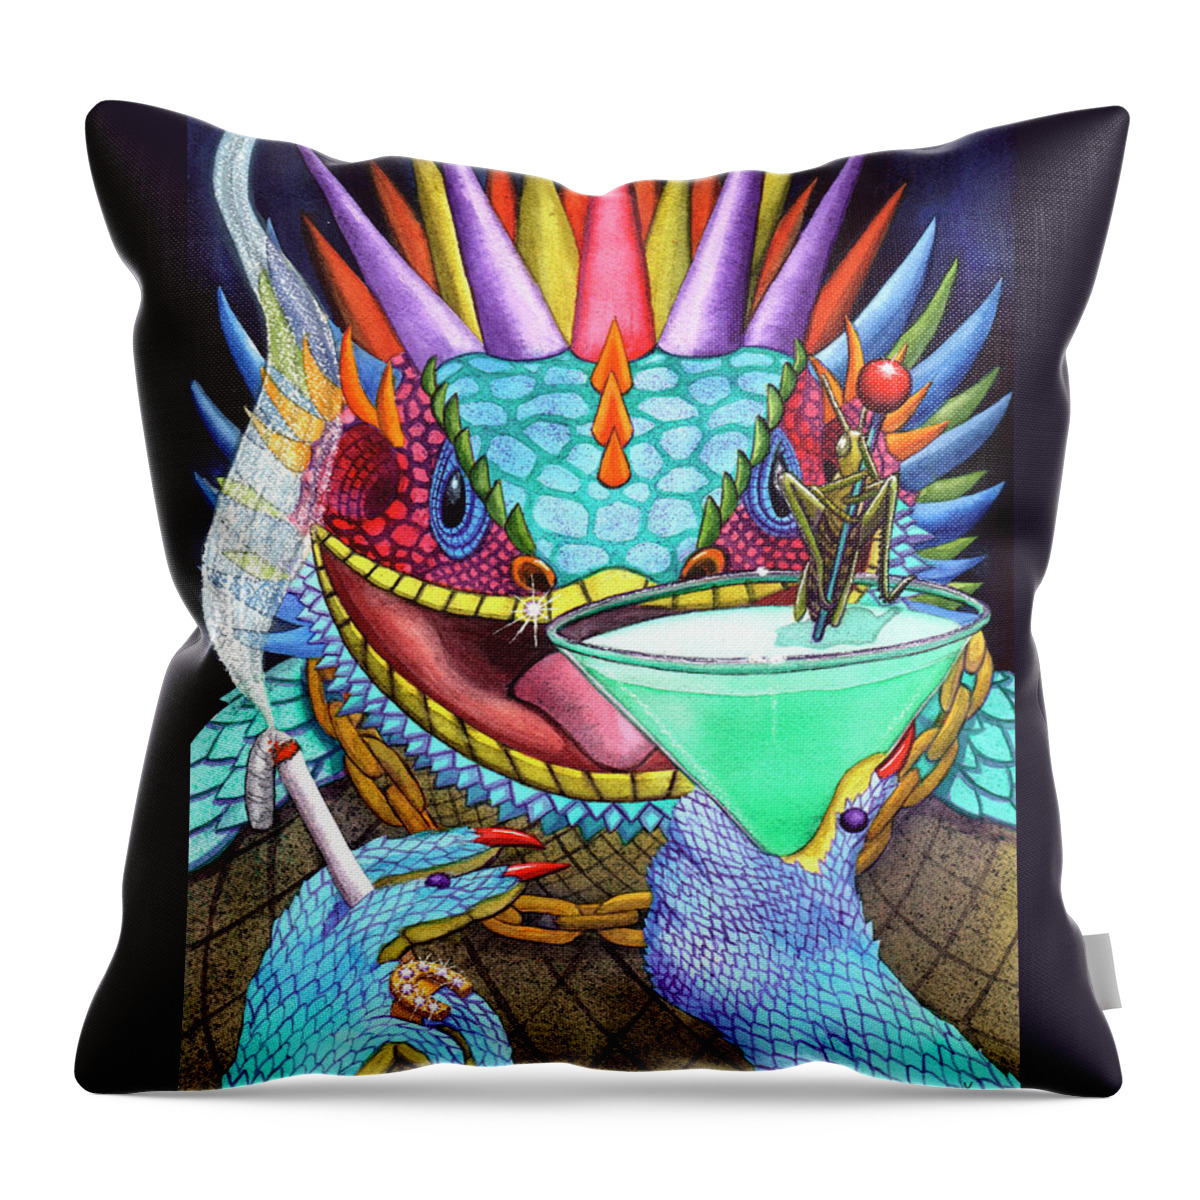 Lizard Throw Pillow featuring the painting Grasshopper by Catherine G McElroy